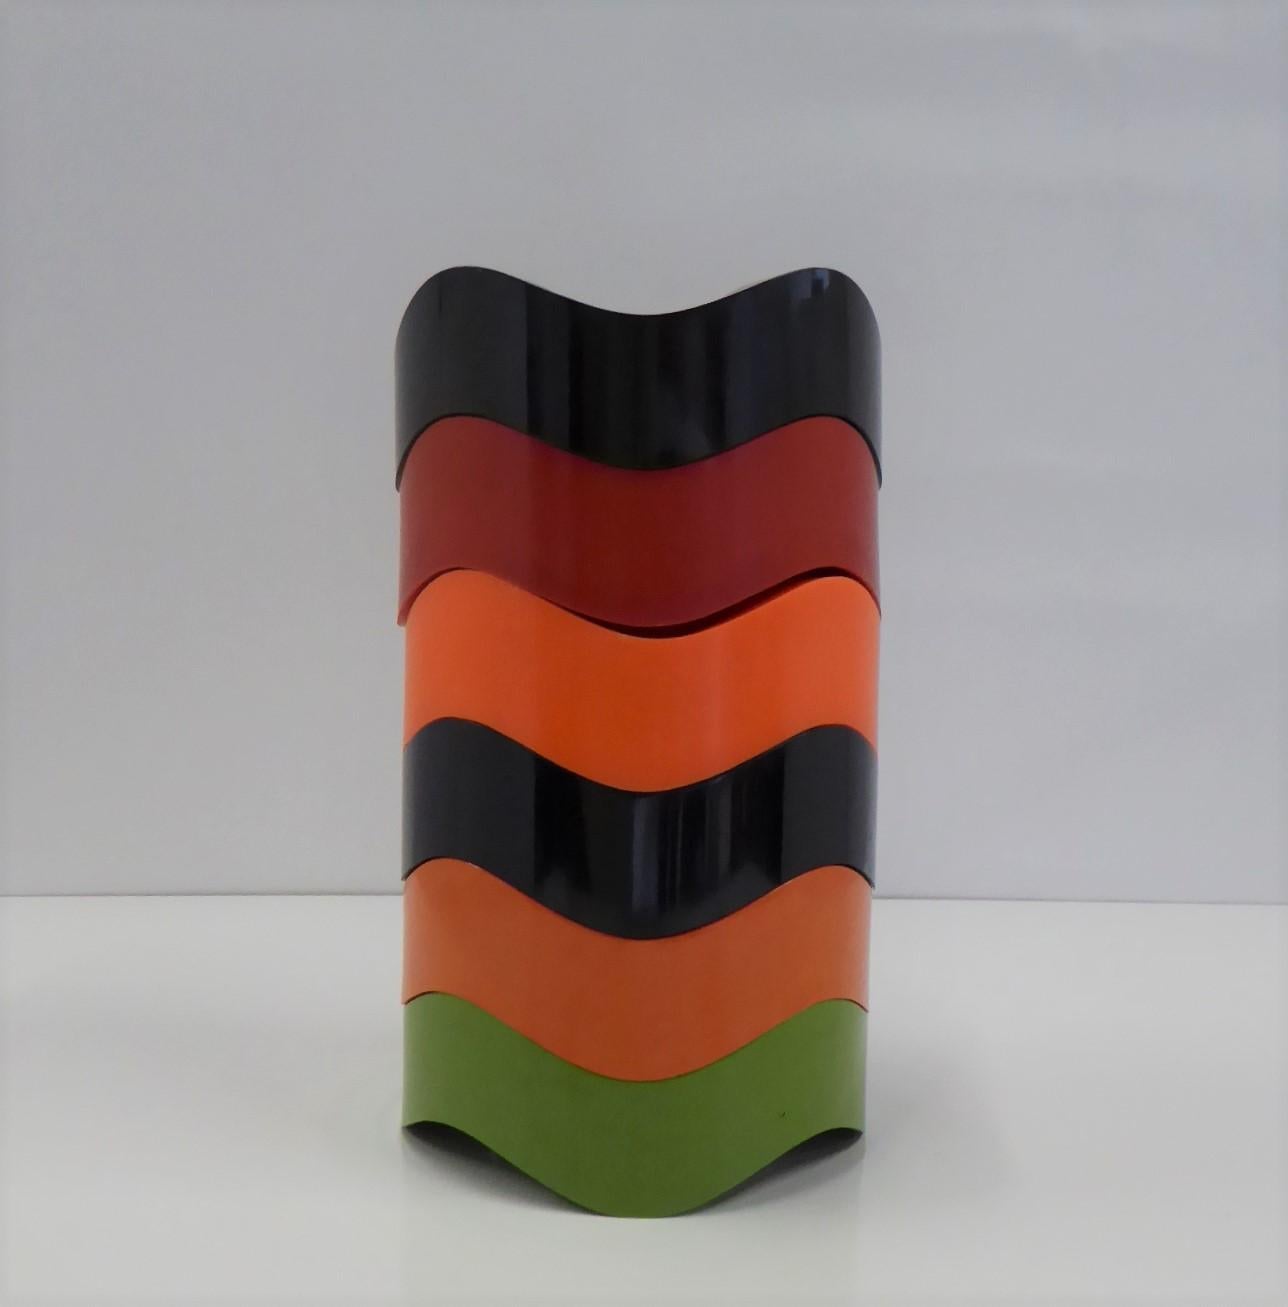 Mid-Century Modern Sinus Stackable Ashtray Group of by Walter Zeischegg for Helit of Germany, 1966